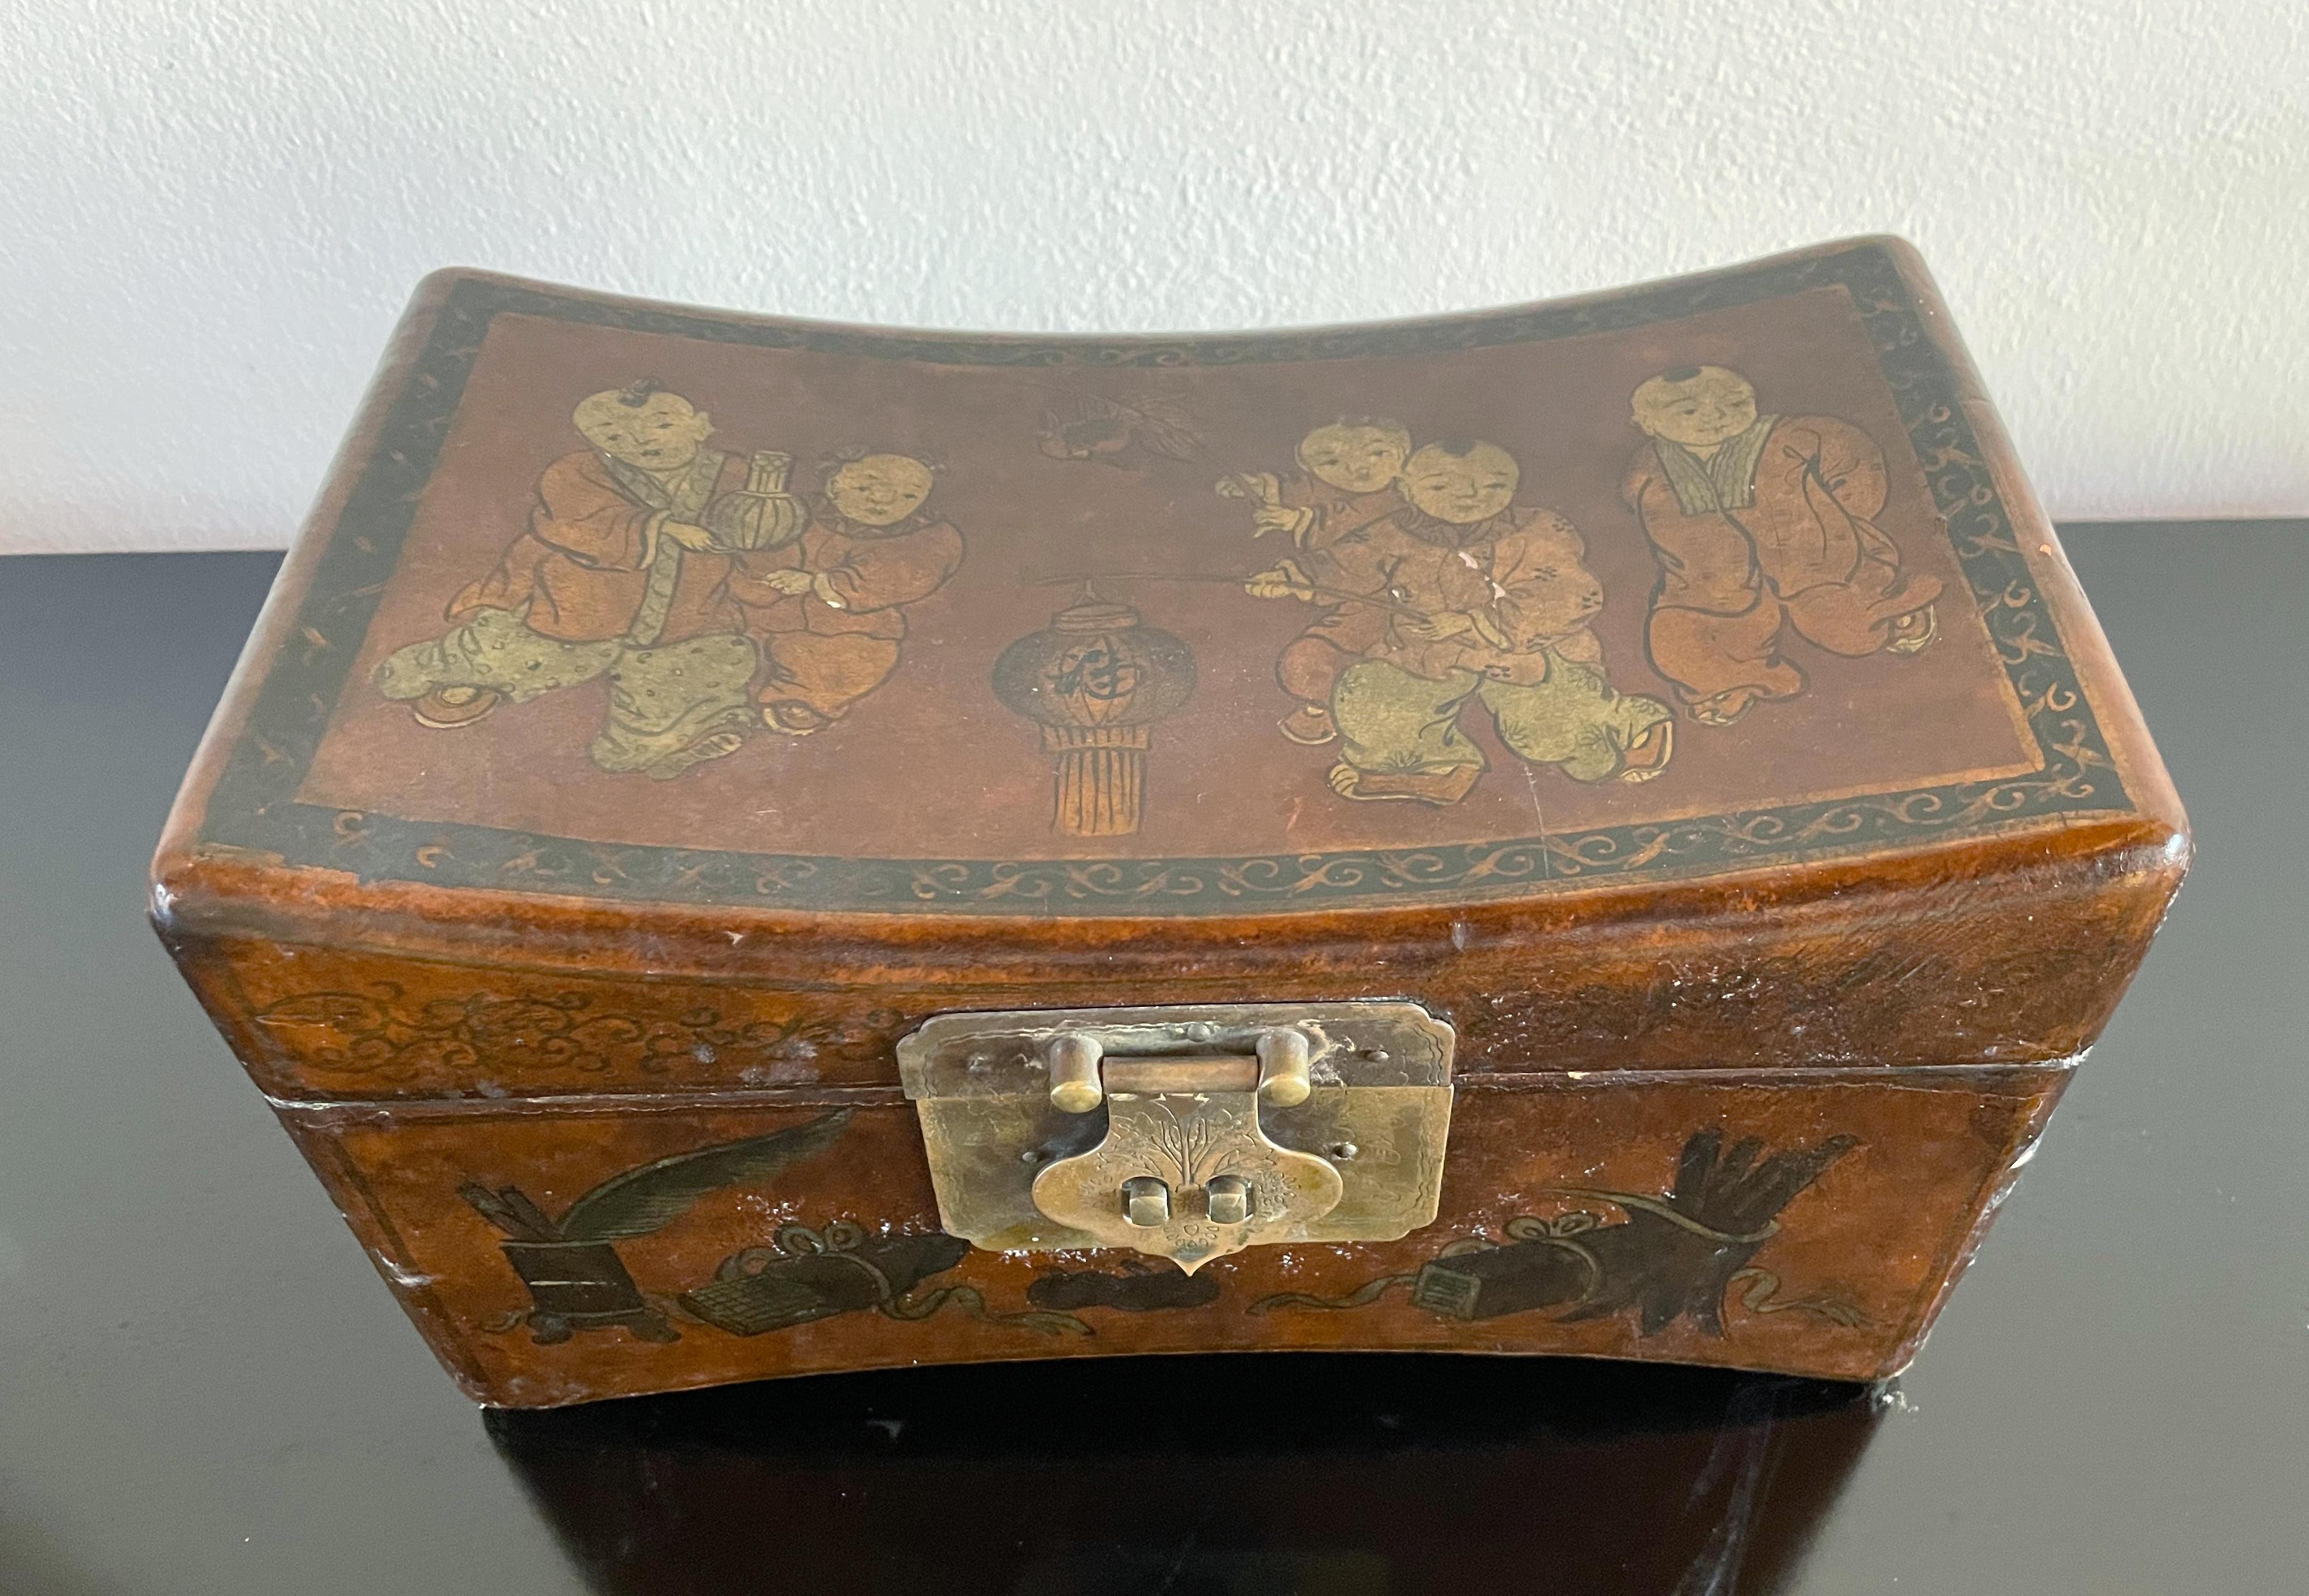 Chinese hand-painted pillow box with copper latch and handles on the sides
Width 10.5 inches / height 6 inches / depth 6 inches
1 available in stock in Italy
Order reference #: FABIOLTD ANT04